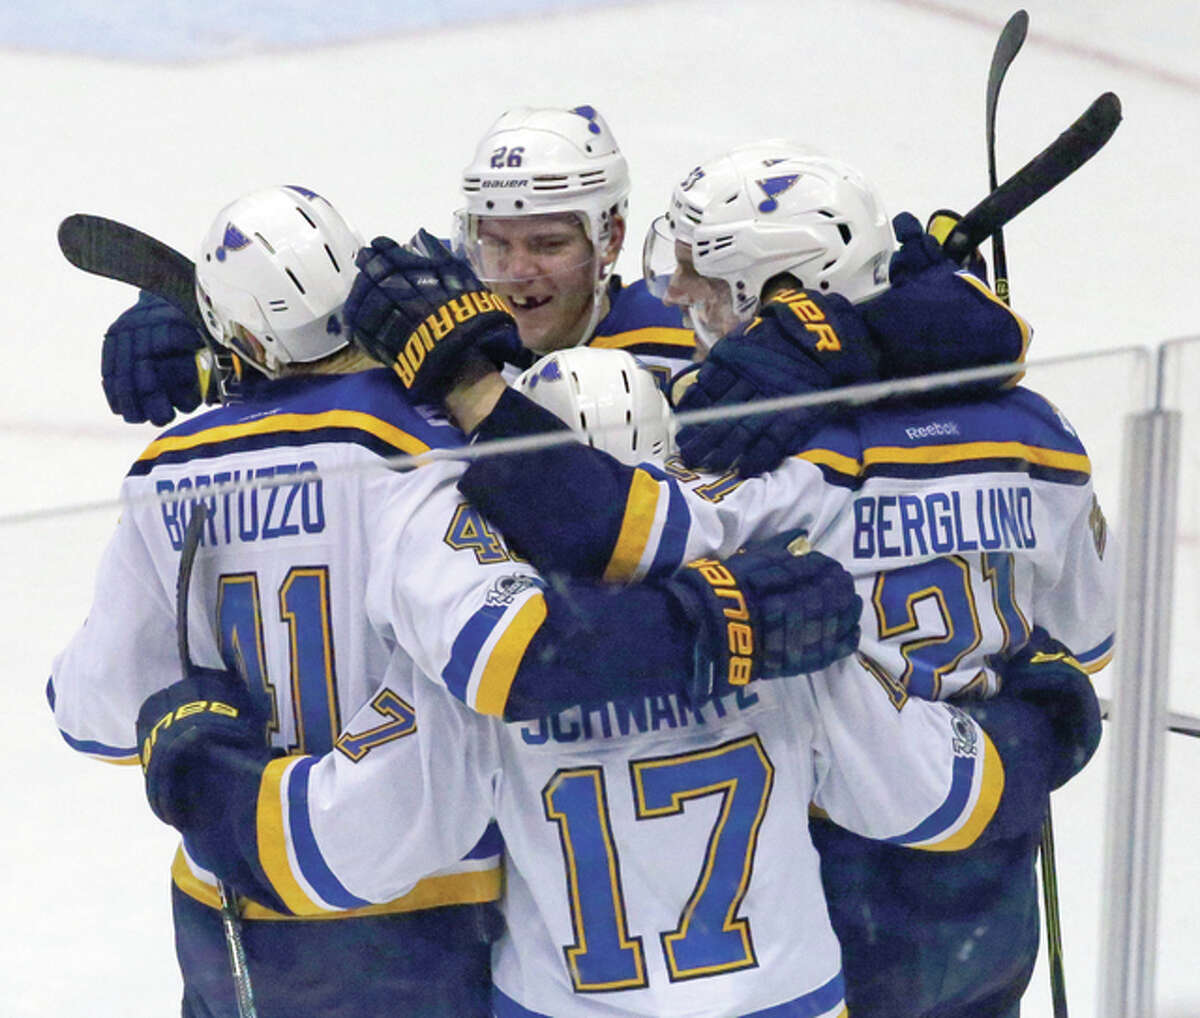 Blues players celebrate with center Patrik Berglund (right), who scored the winning goal in overtime for the 2-1 win over the Anaheim Ducks on Sunday night in Anaheim, Calif.